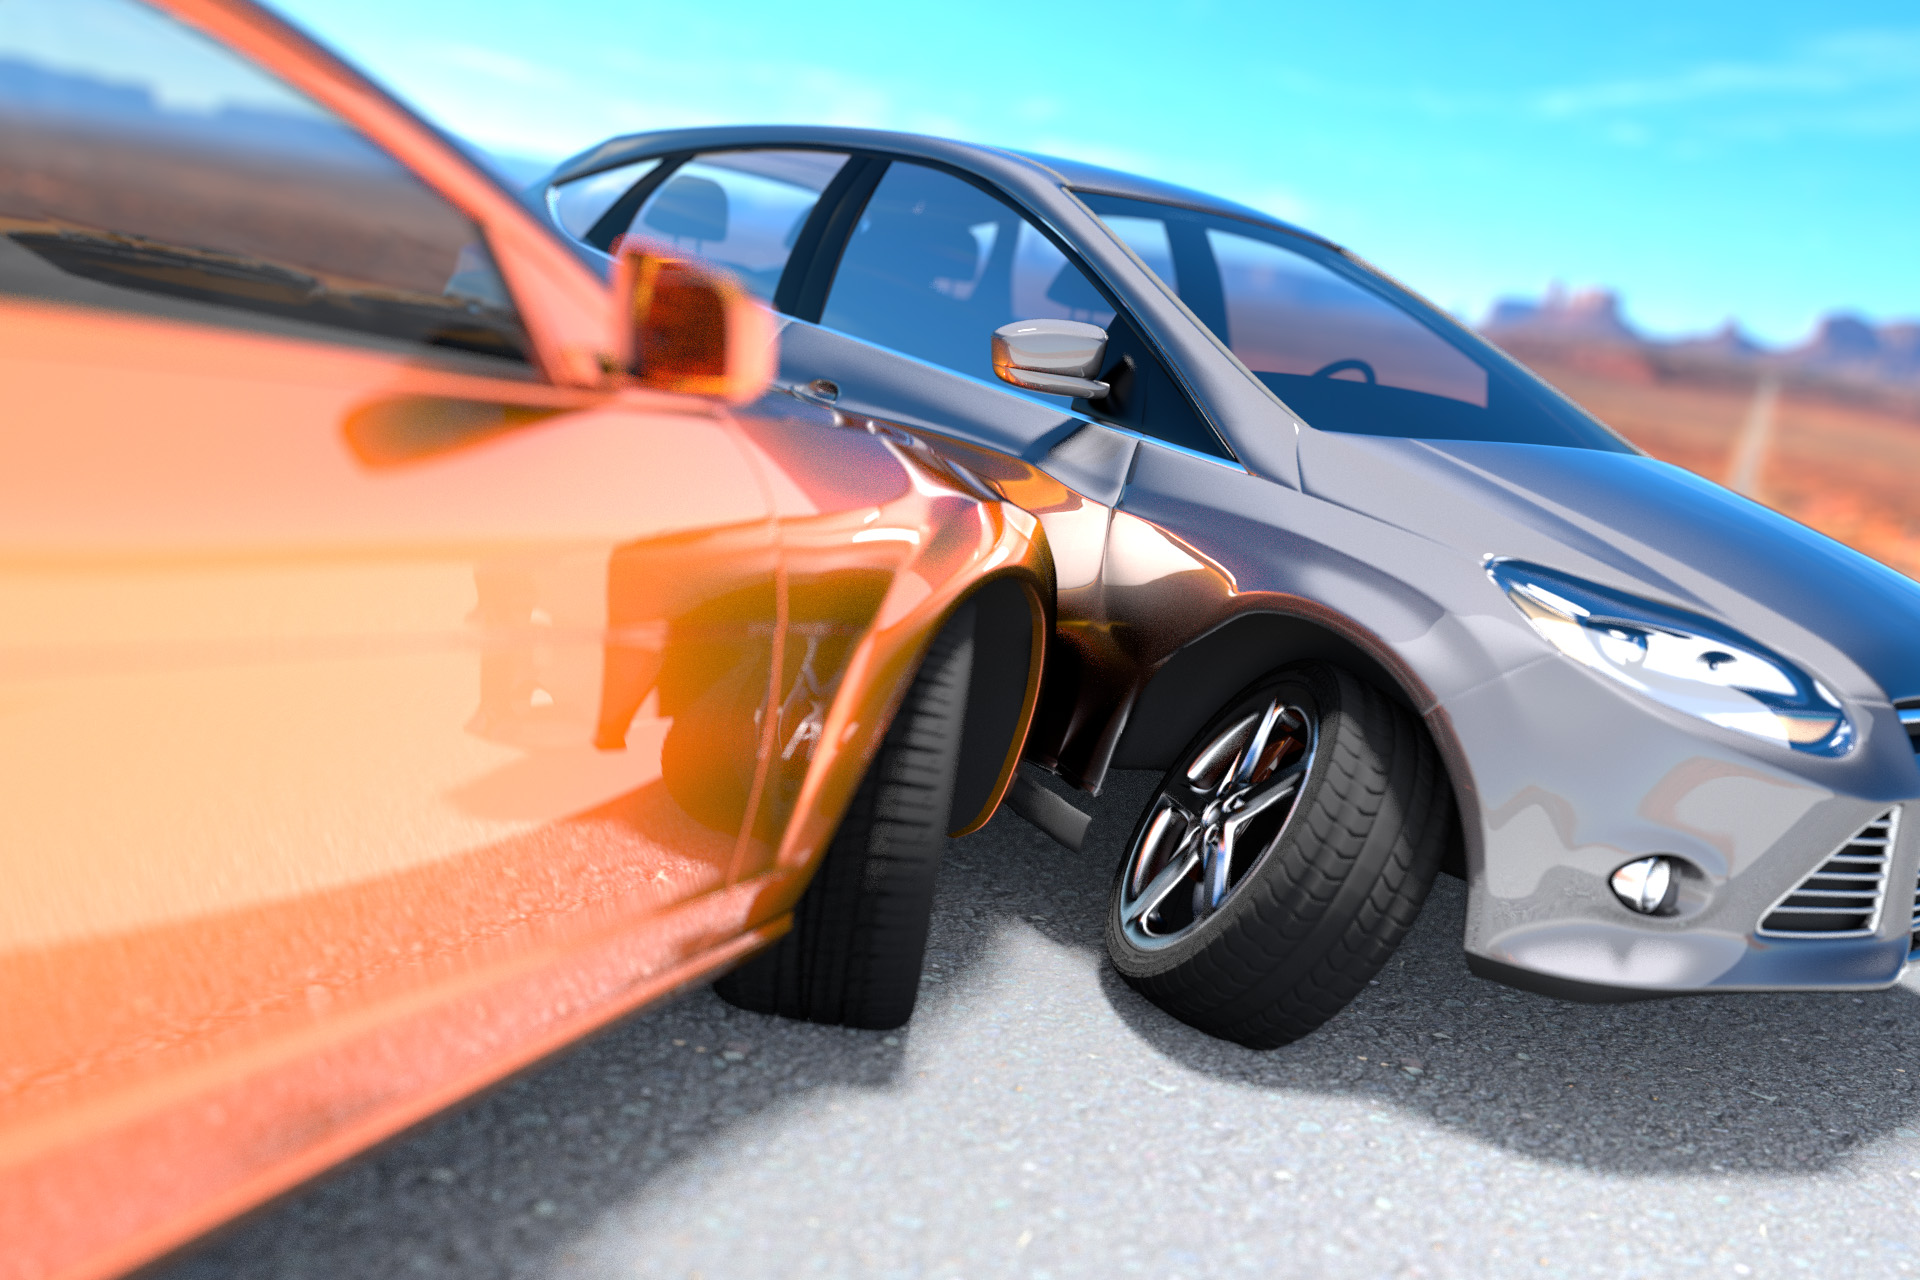 Accident damage from side impact collision free image download